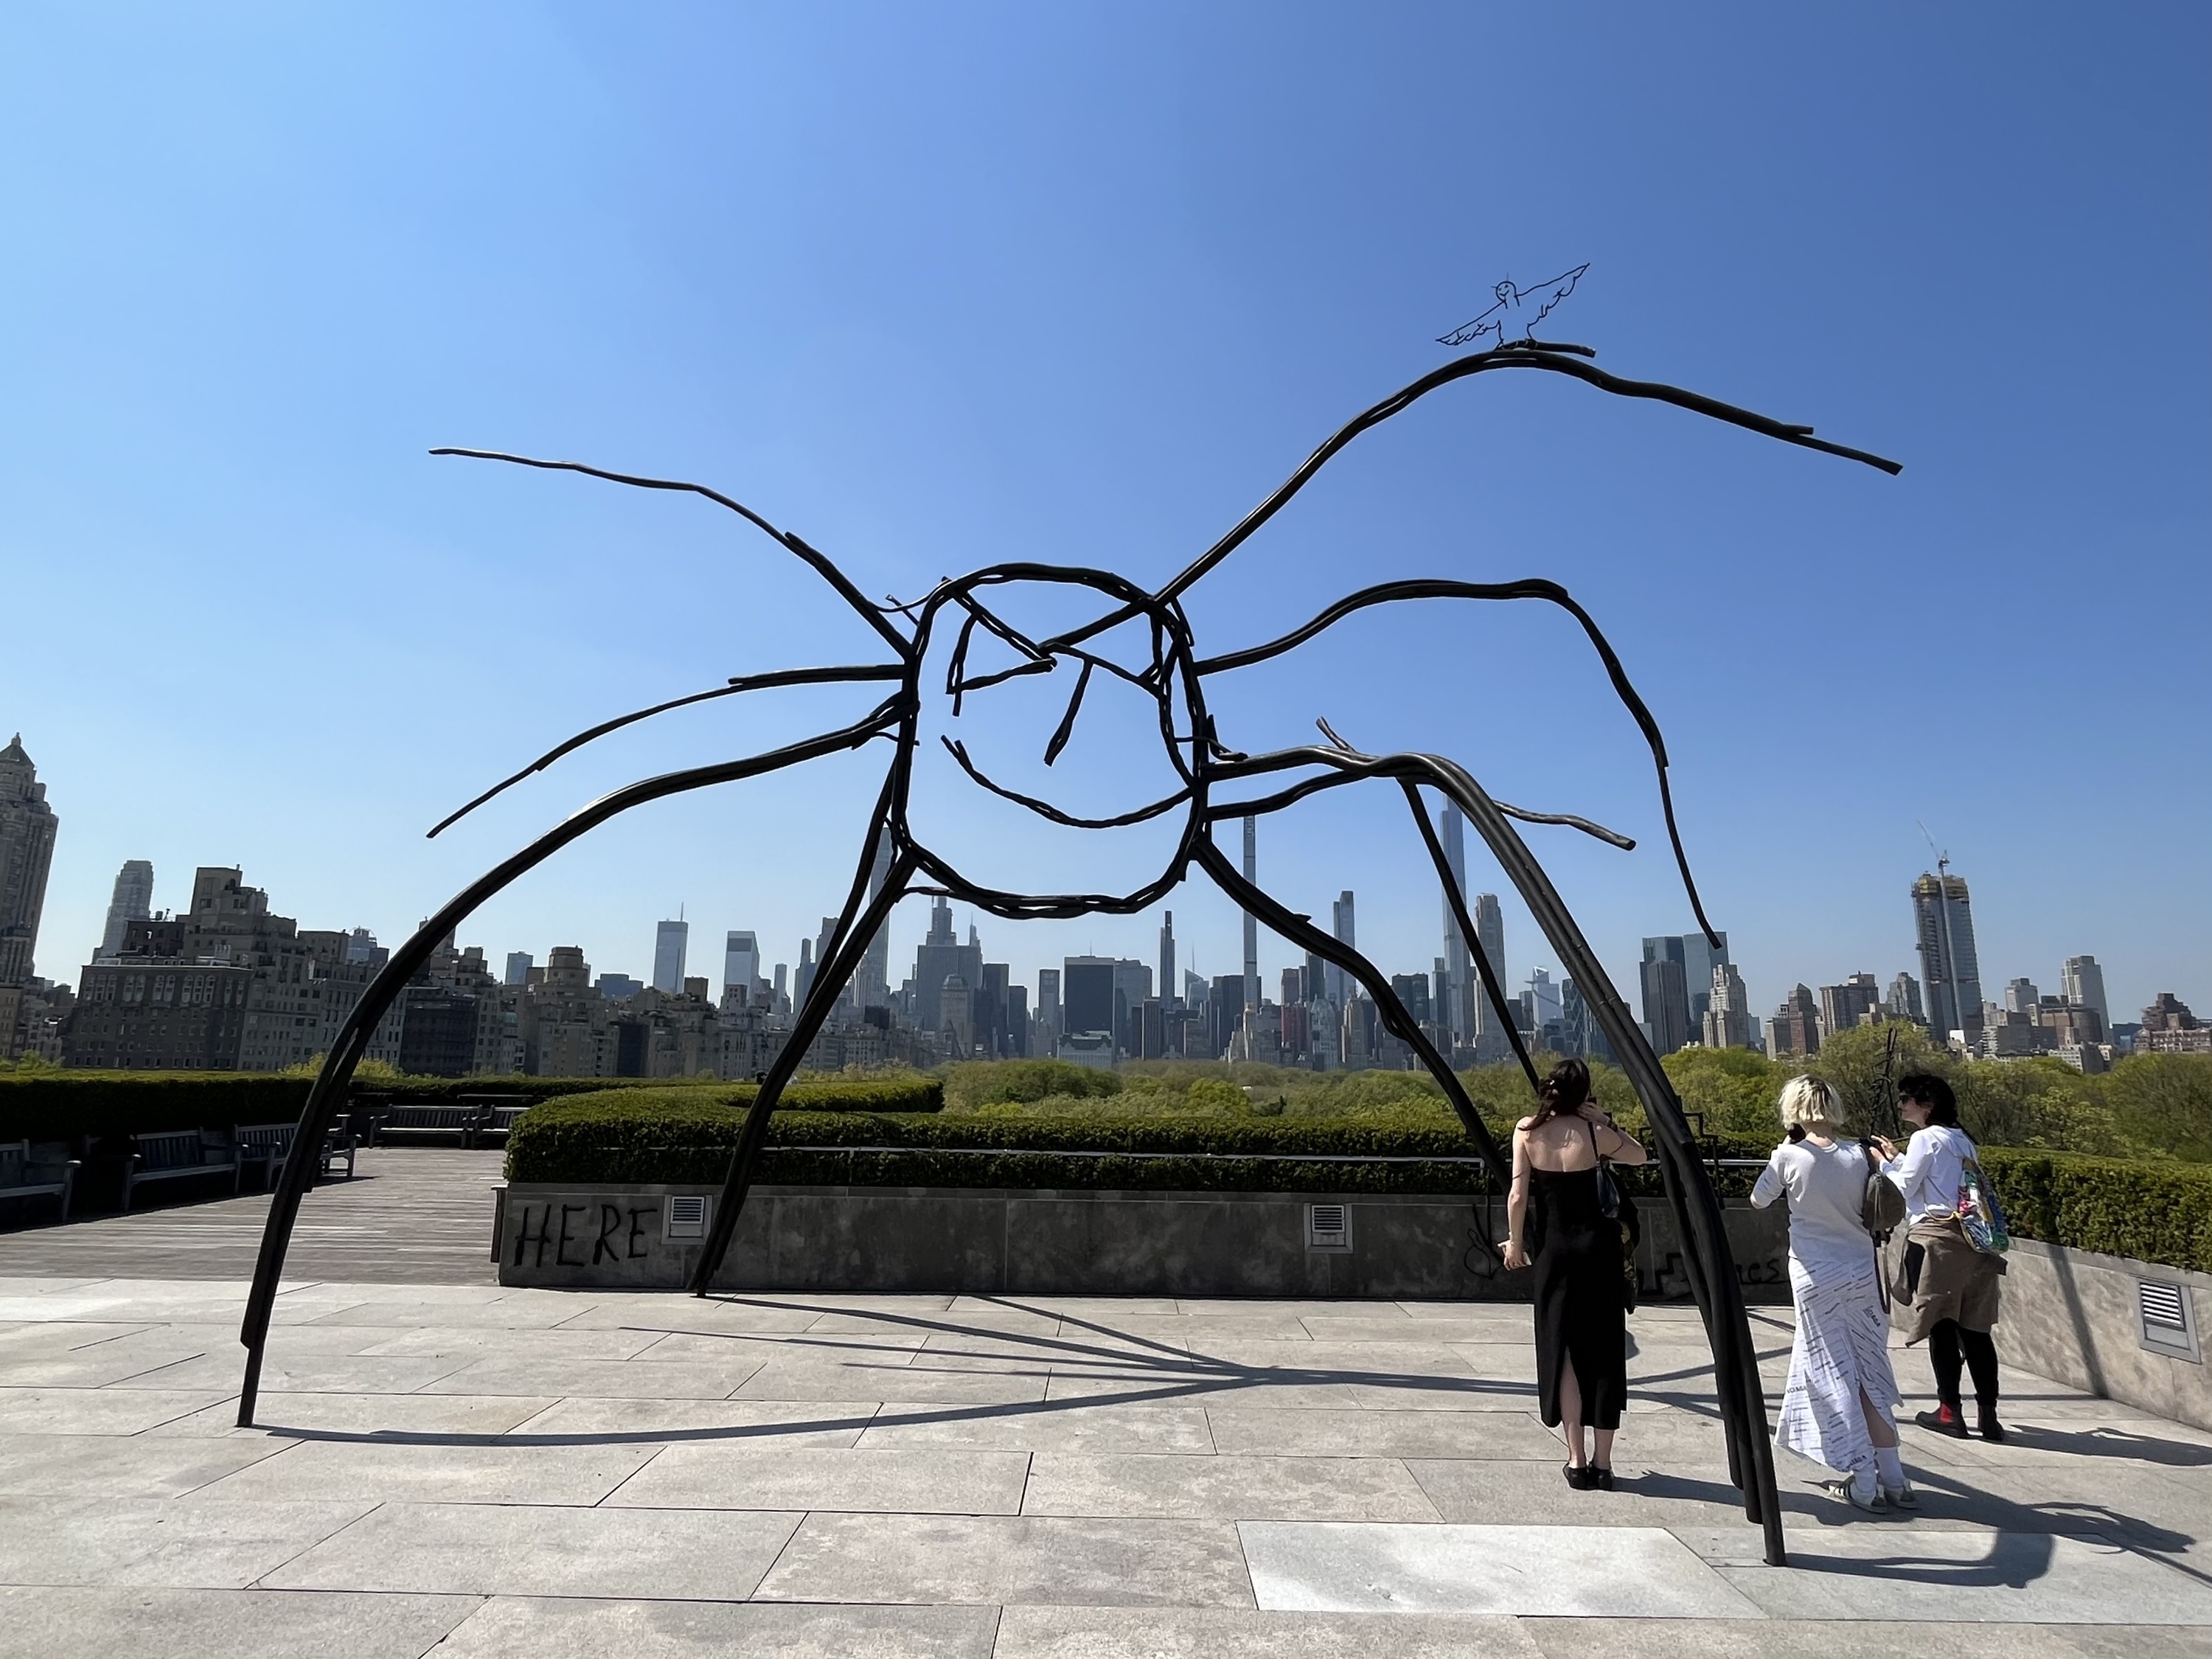 A first look at the Met’s powerful new rooftop art installation